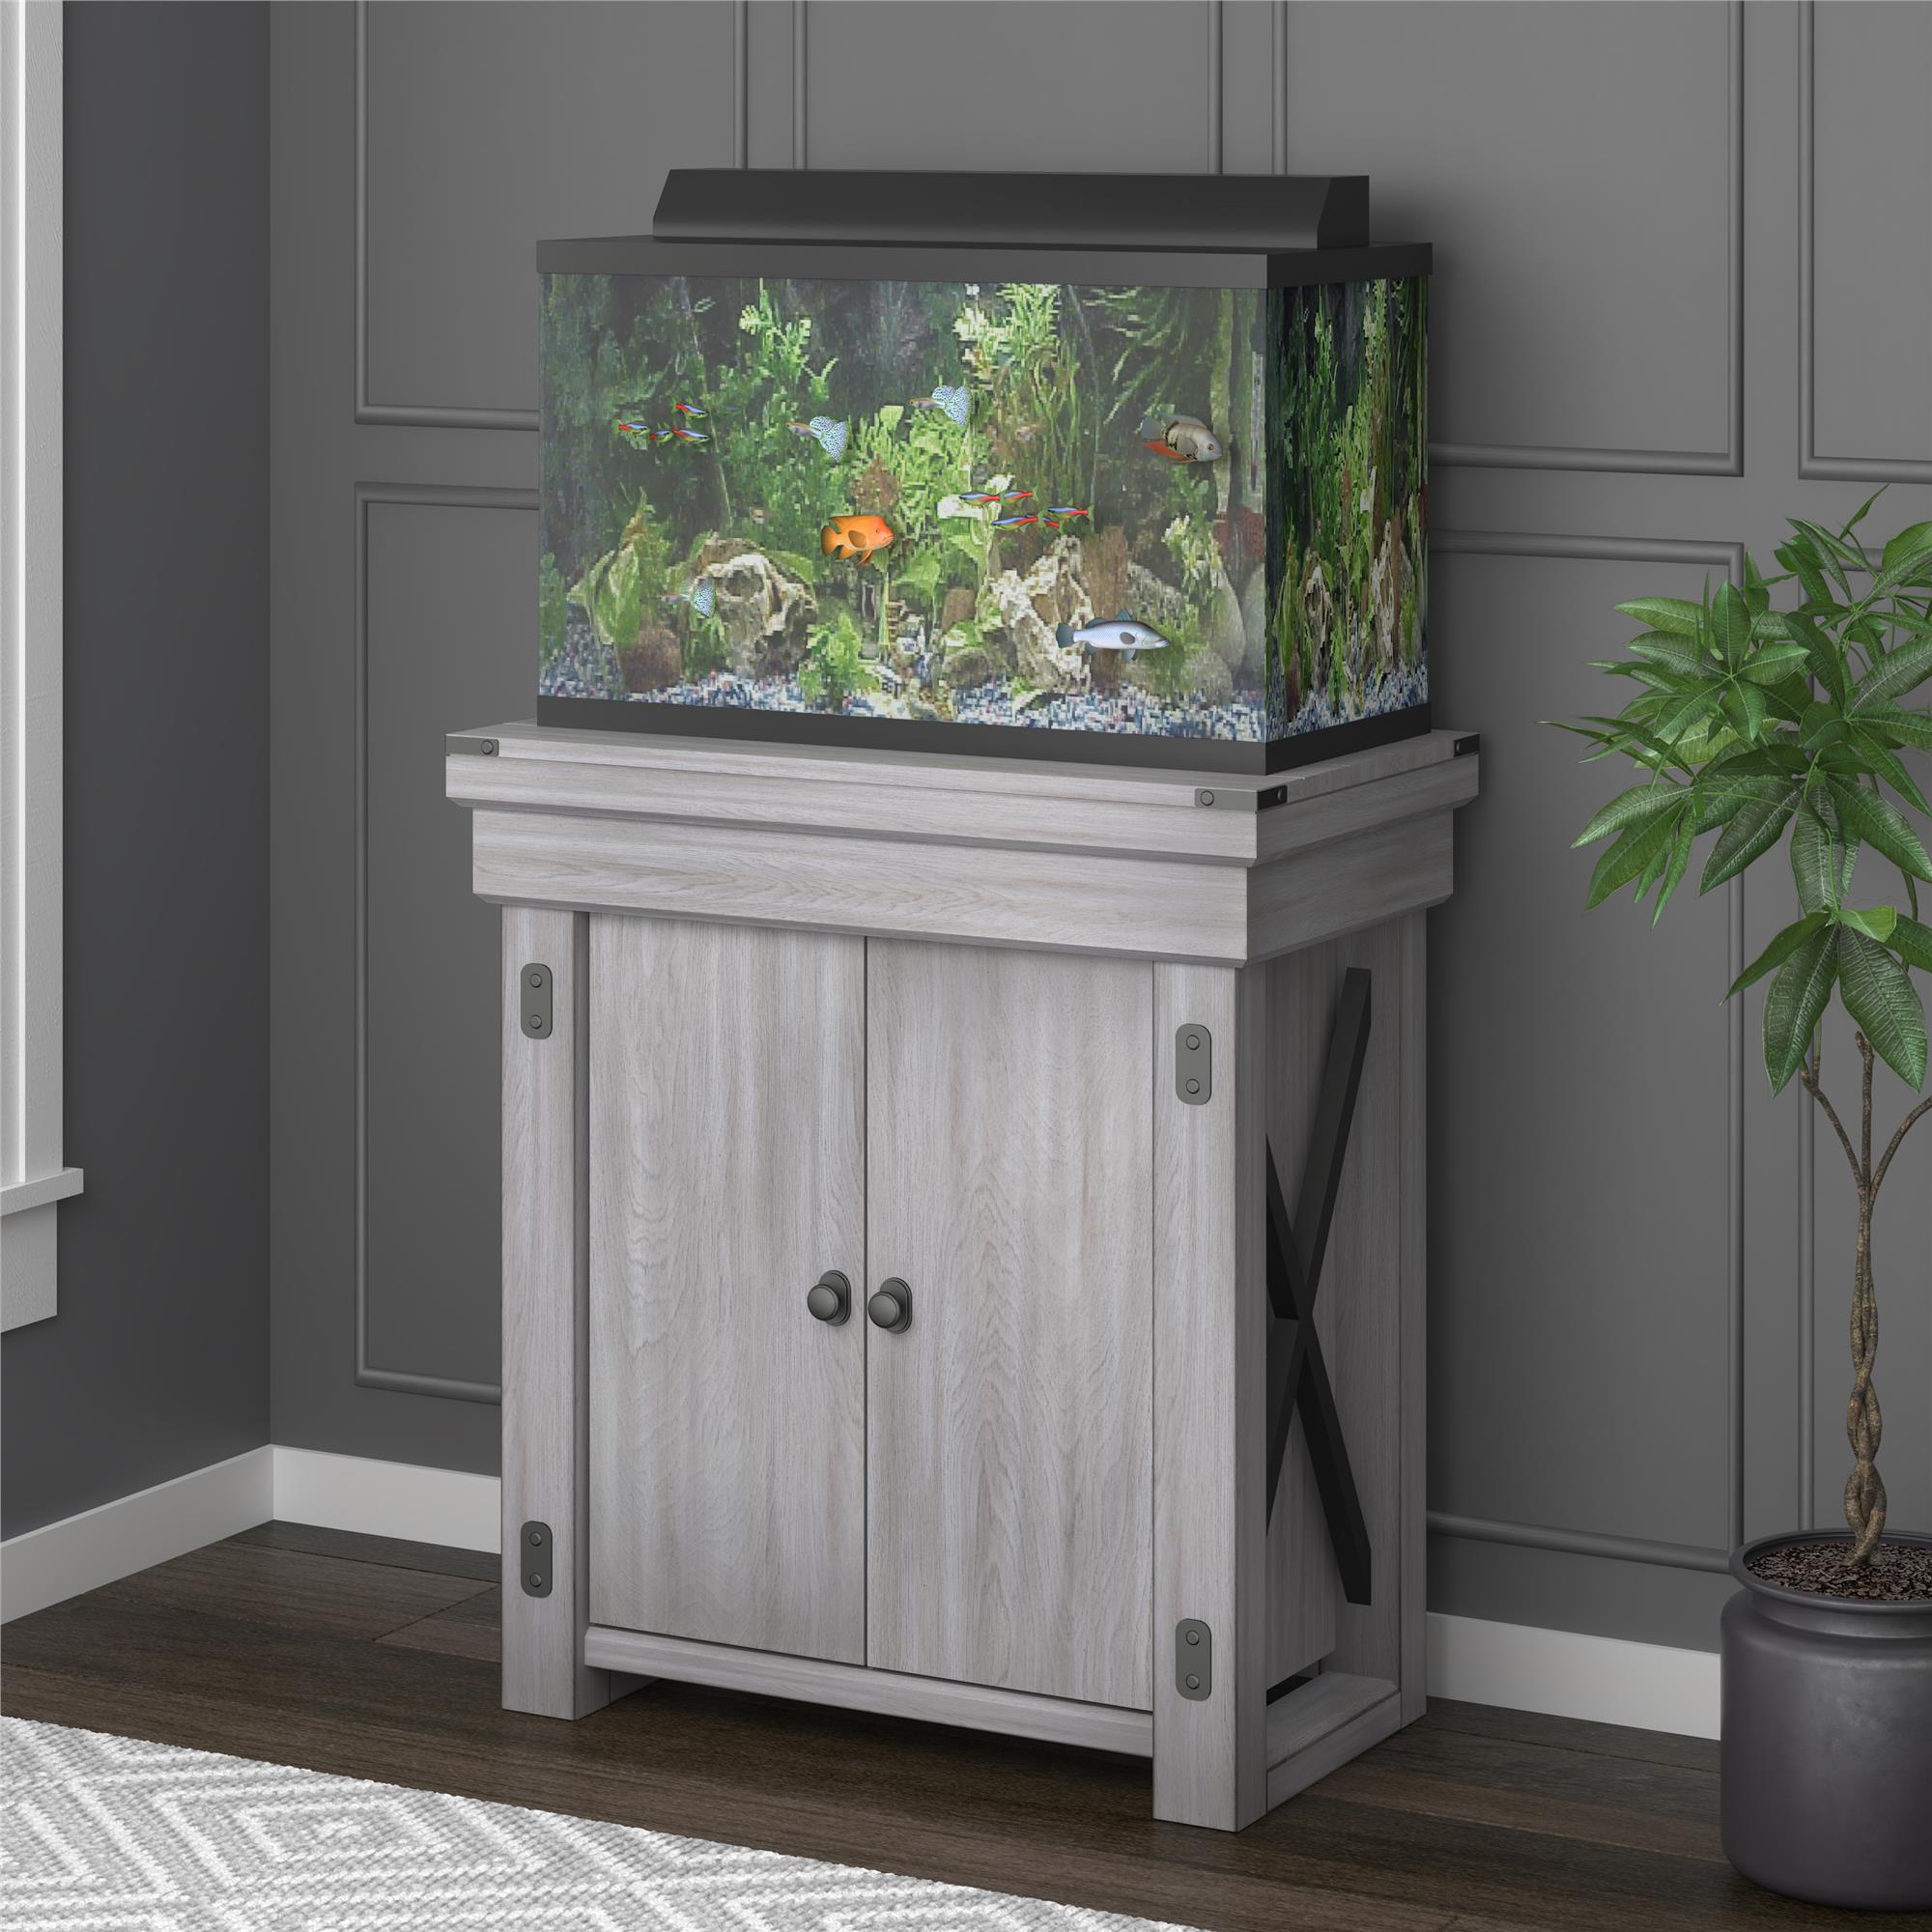 modern stand with 2 doors for aqarium tank